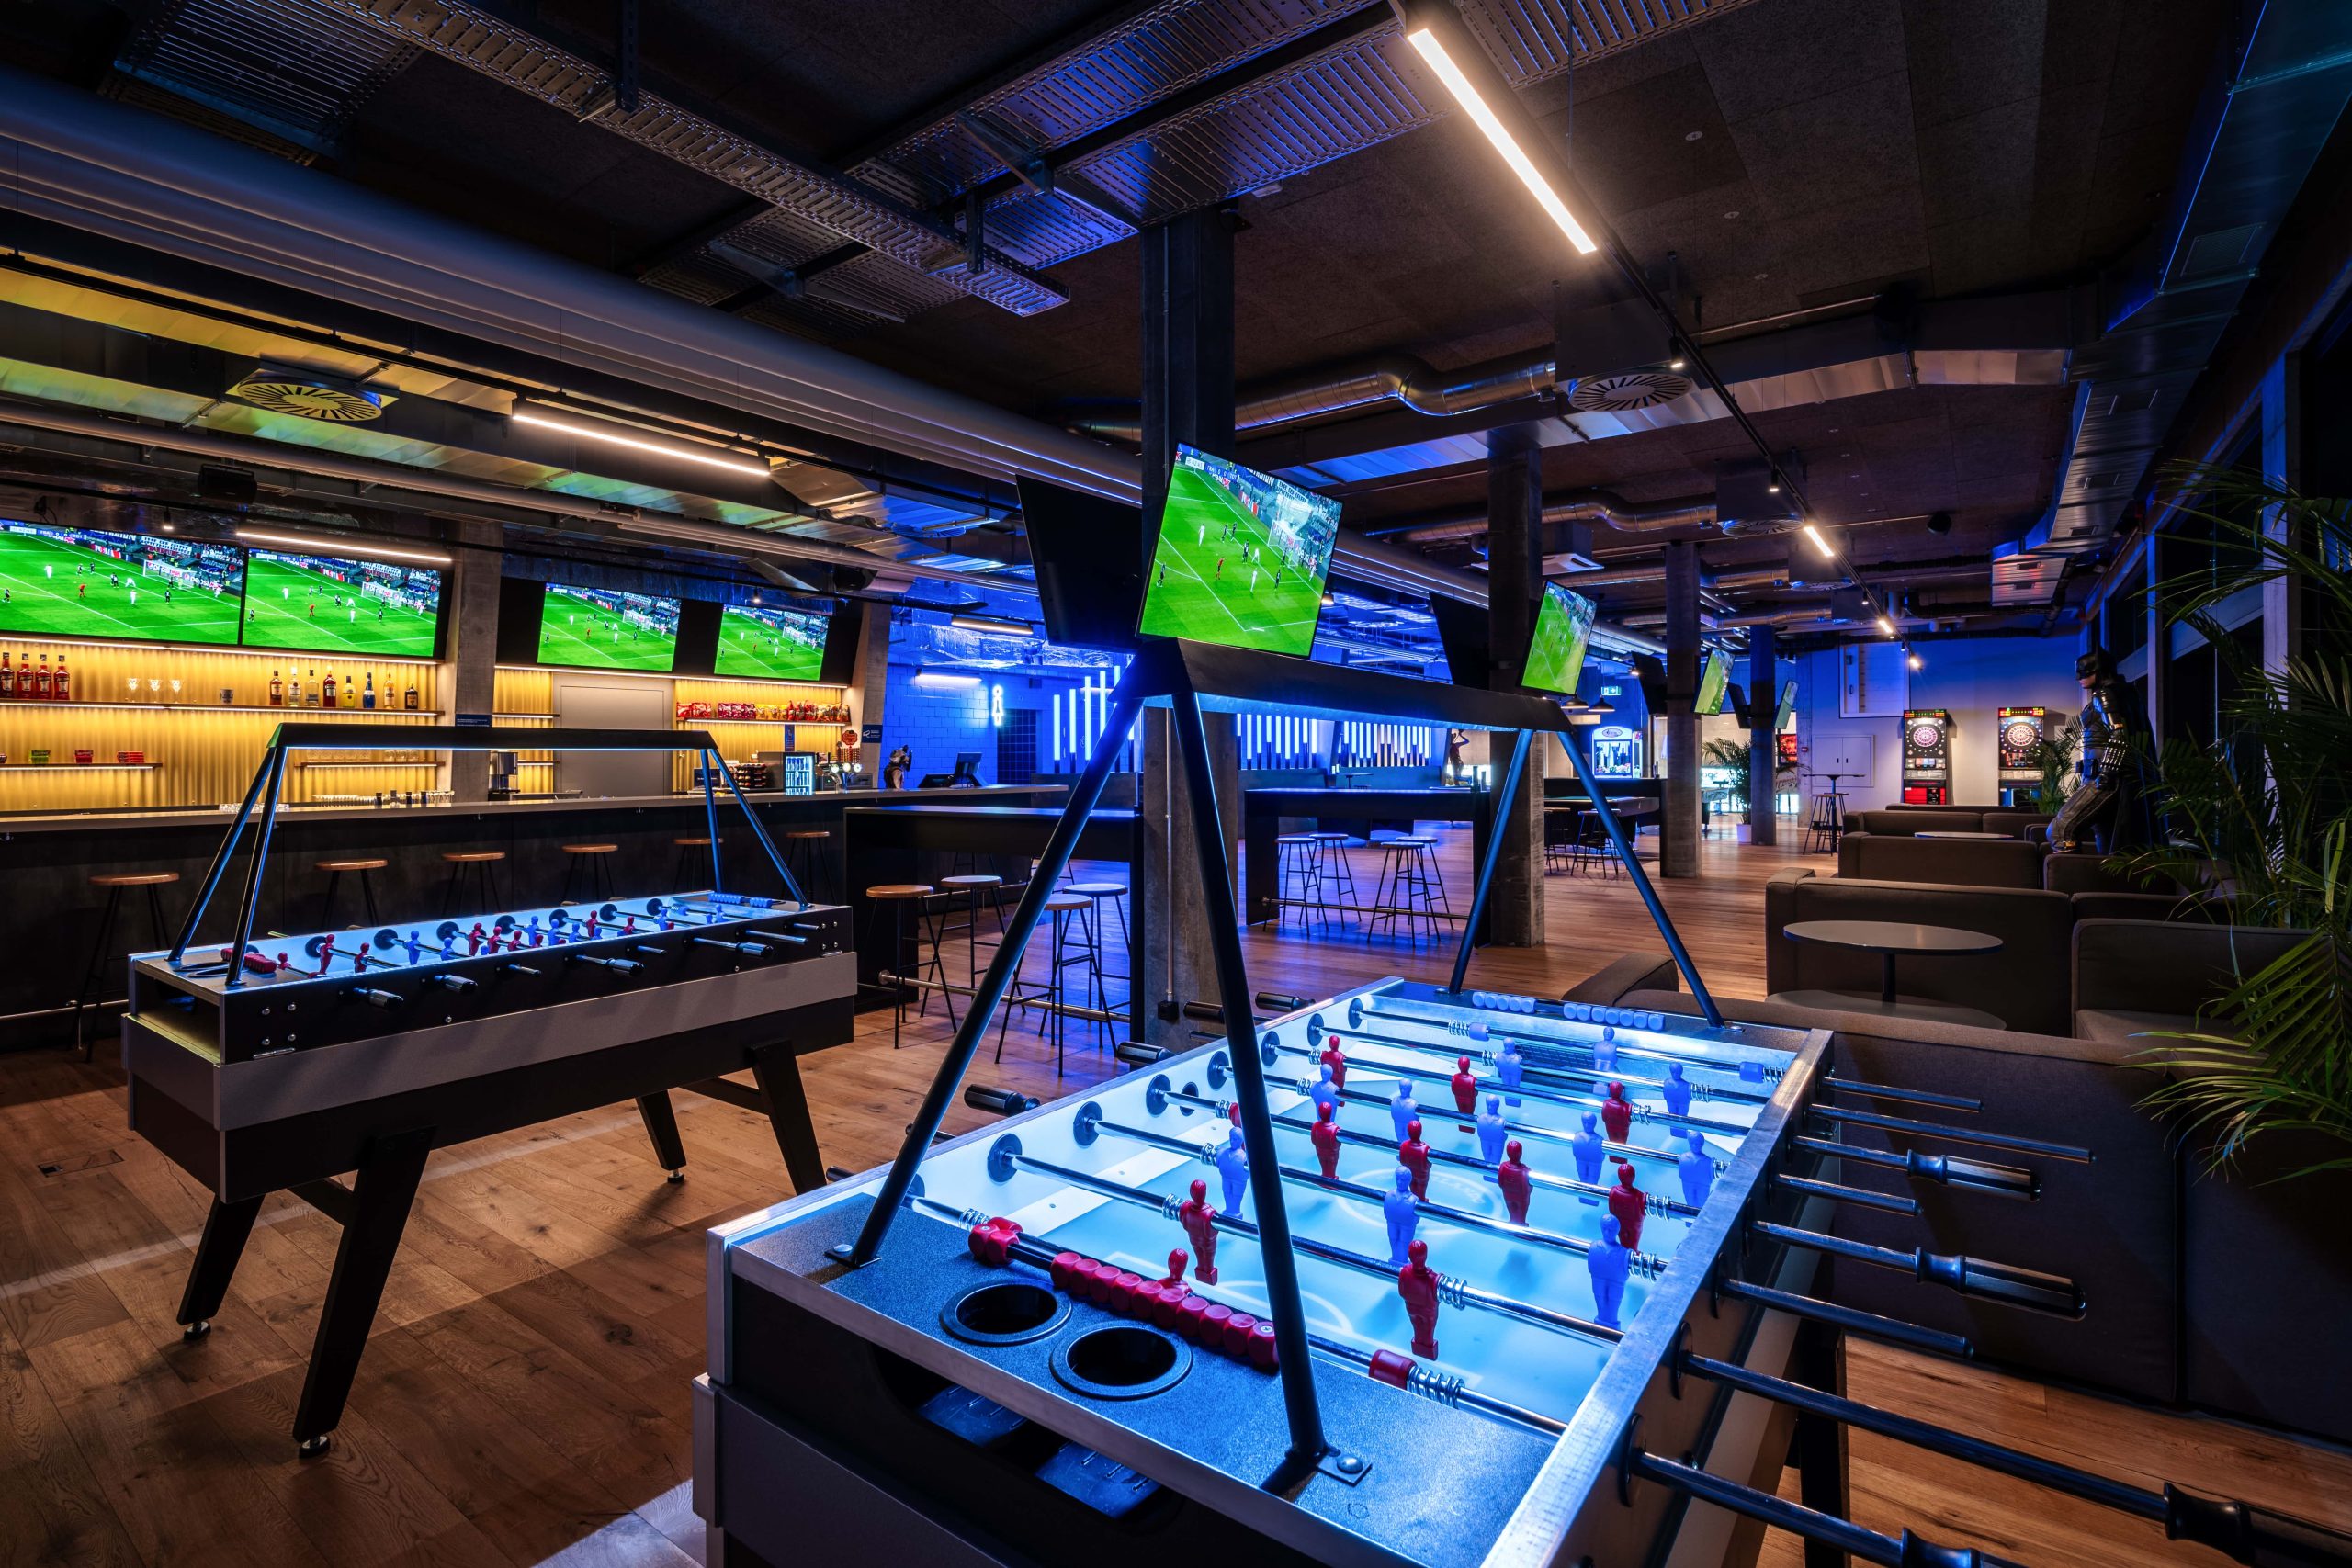 Vibrant game zone at blue Cinema with foosball and pool tables amidst sports broadcasts.